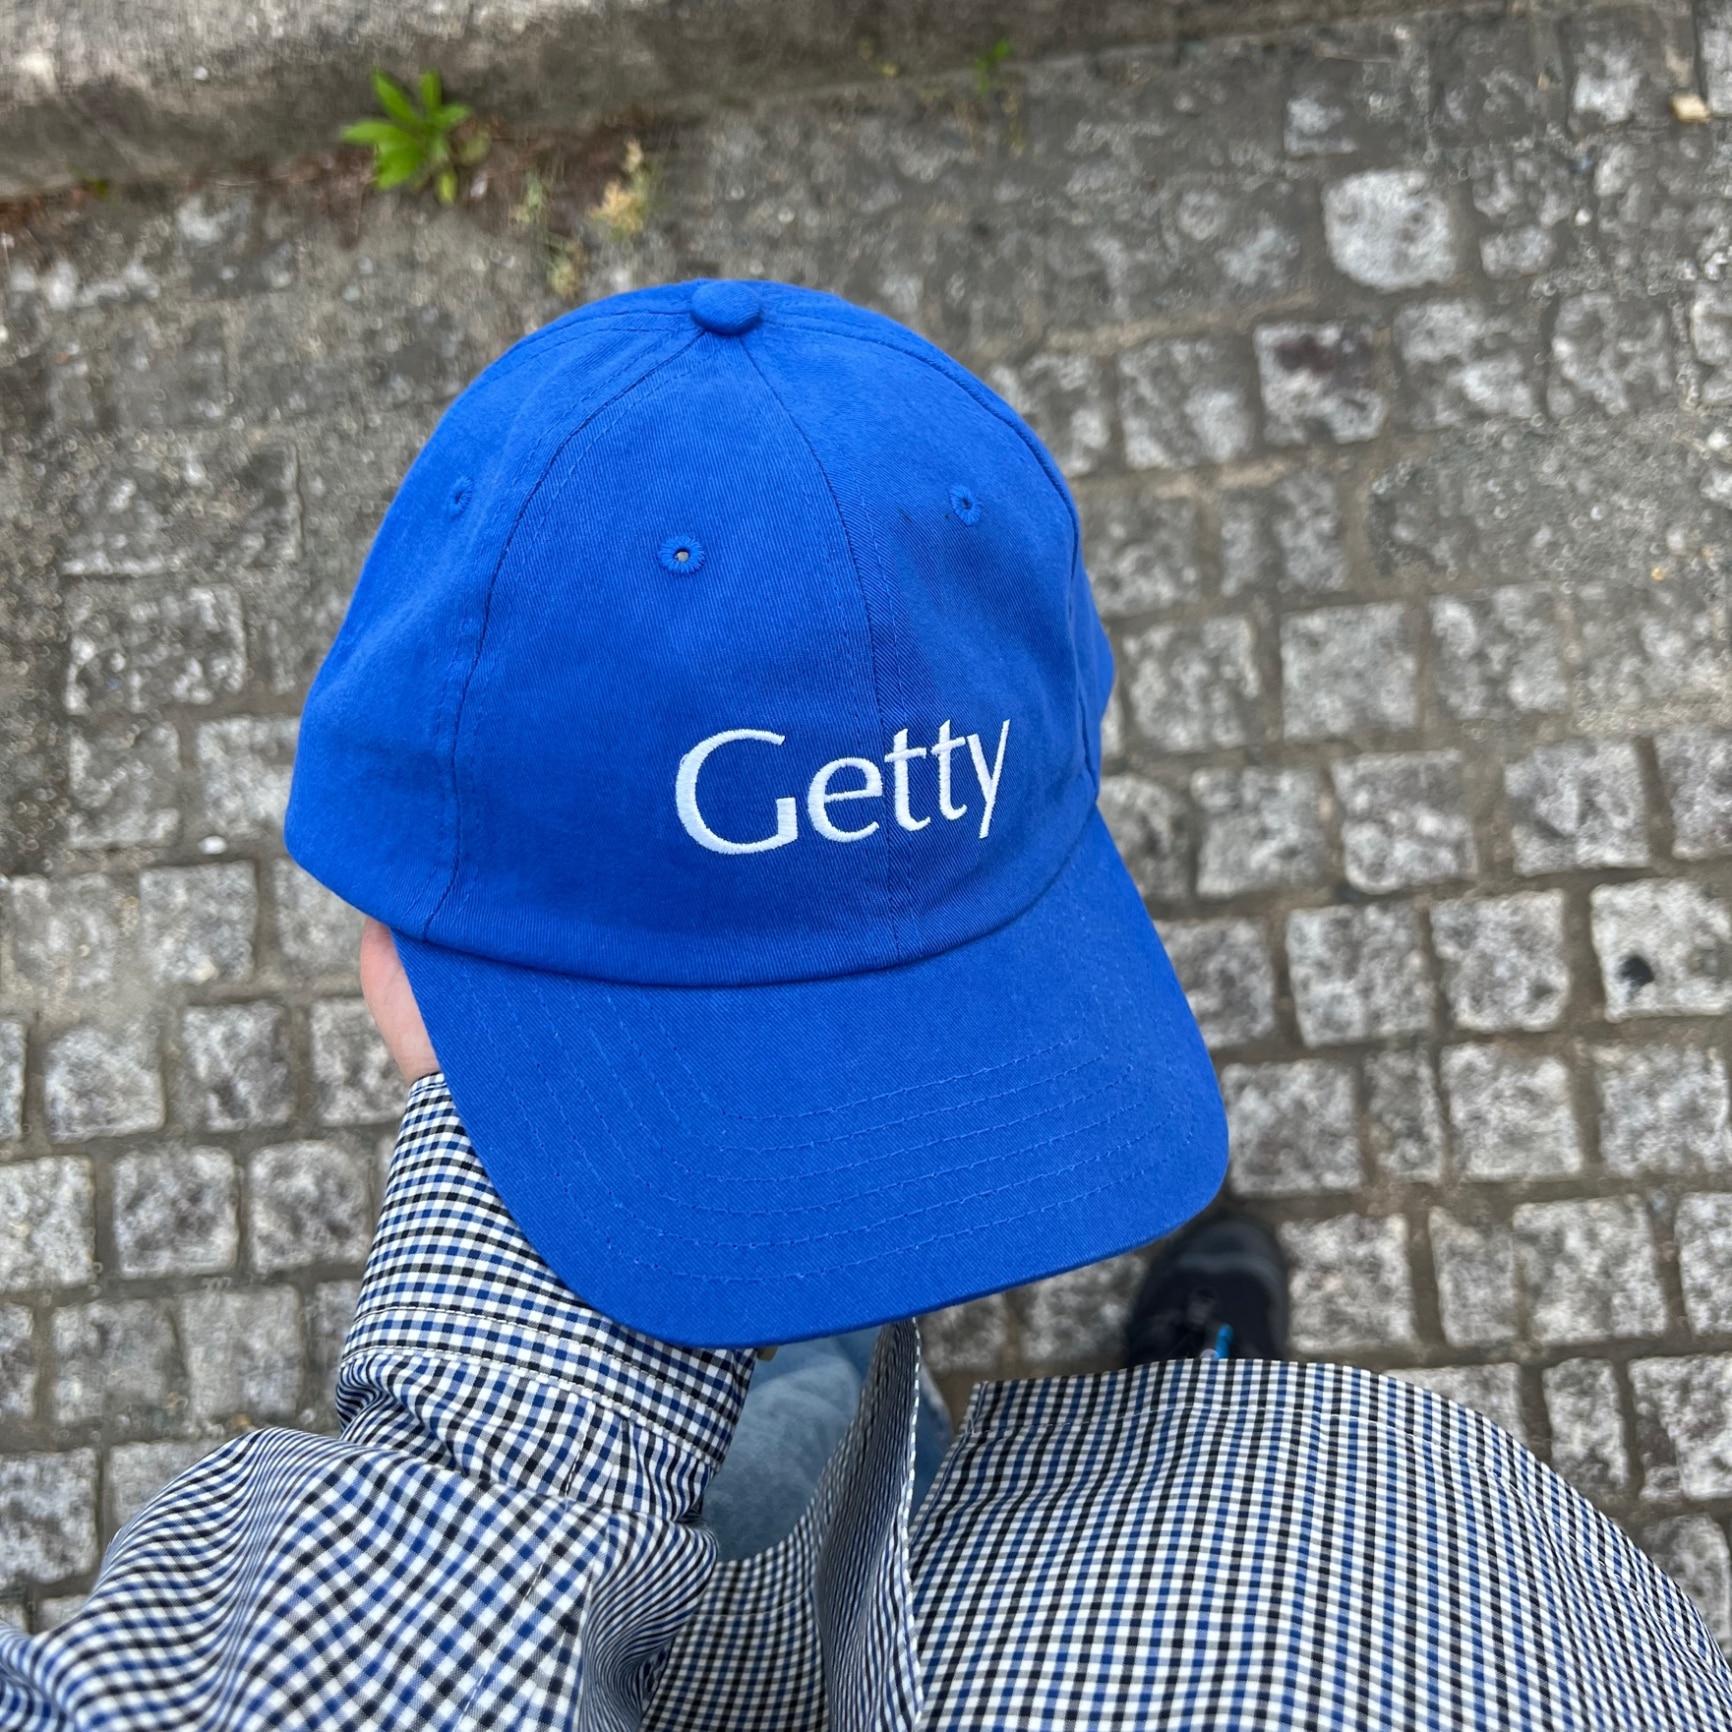 Getty Center Museum Embroidered Logo Cap ゲッティ・センター 